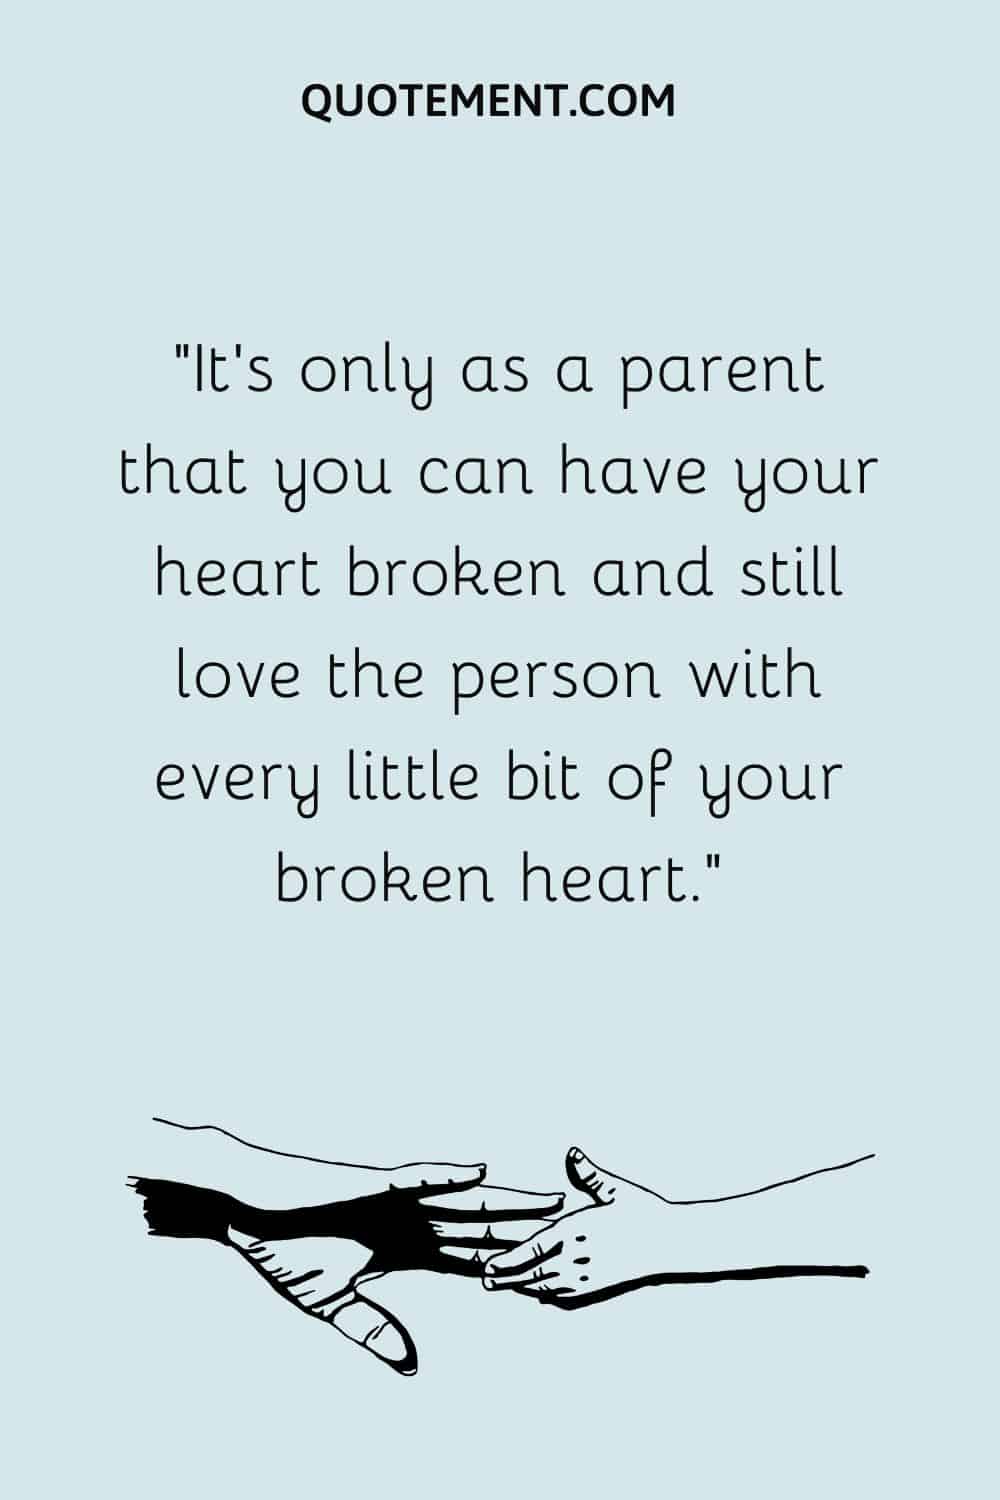 It’s only as a parent that you can have your heart broken and still love the person with every little bit of your broken heart.